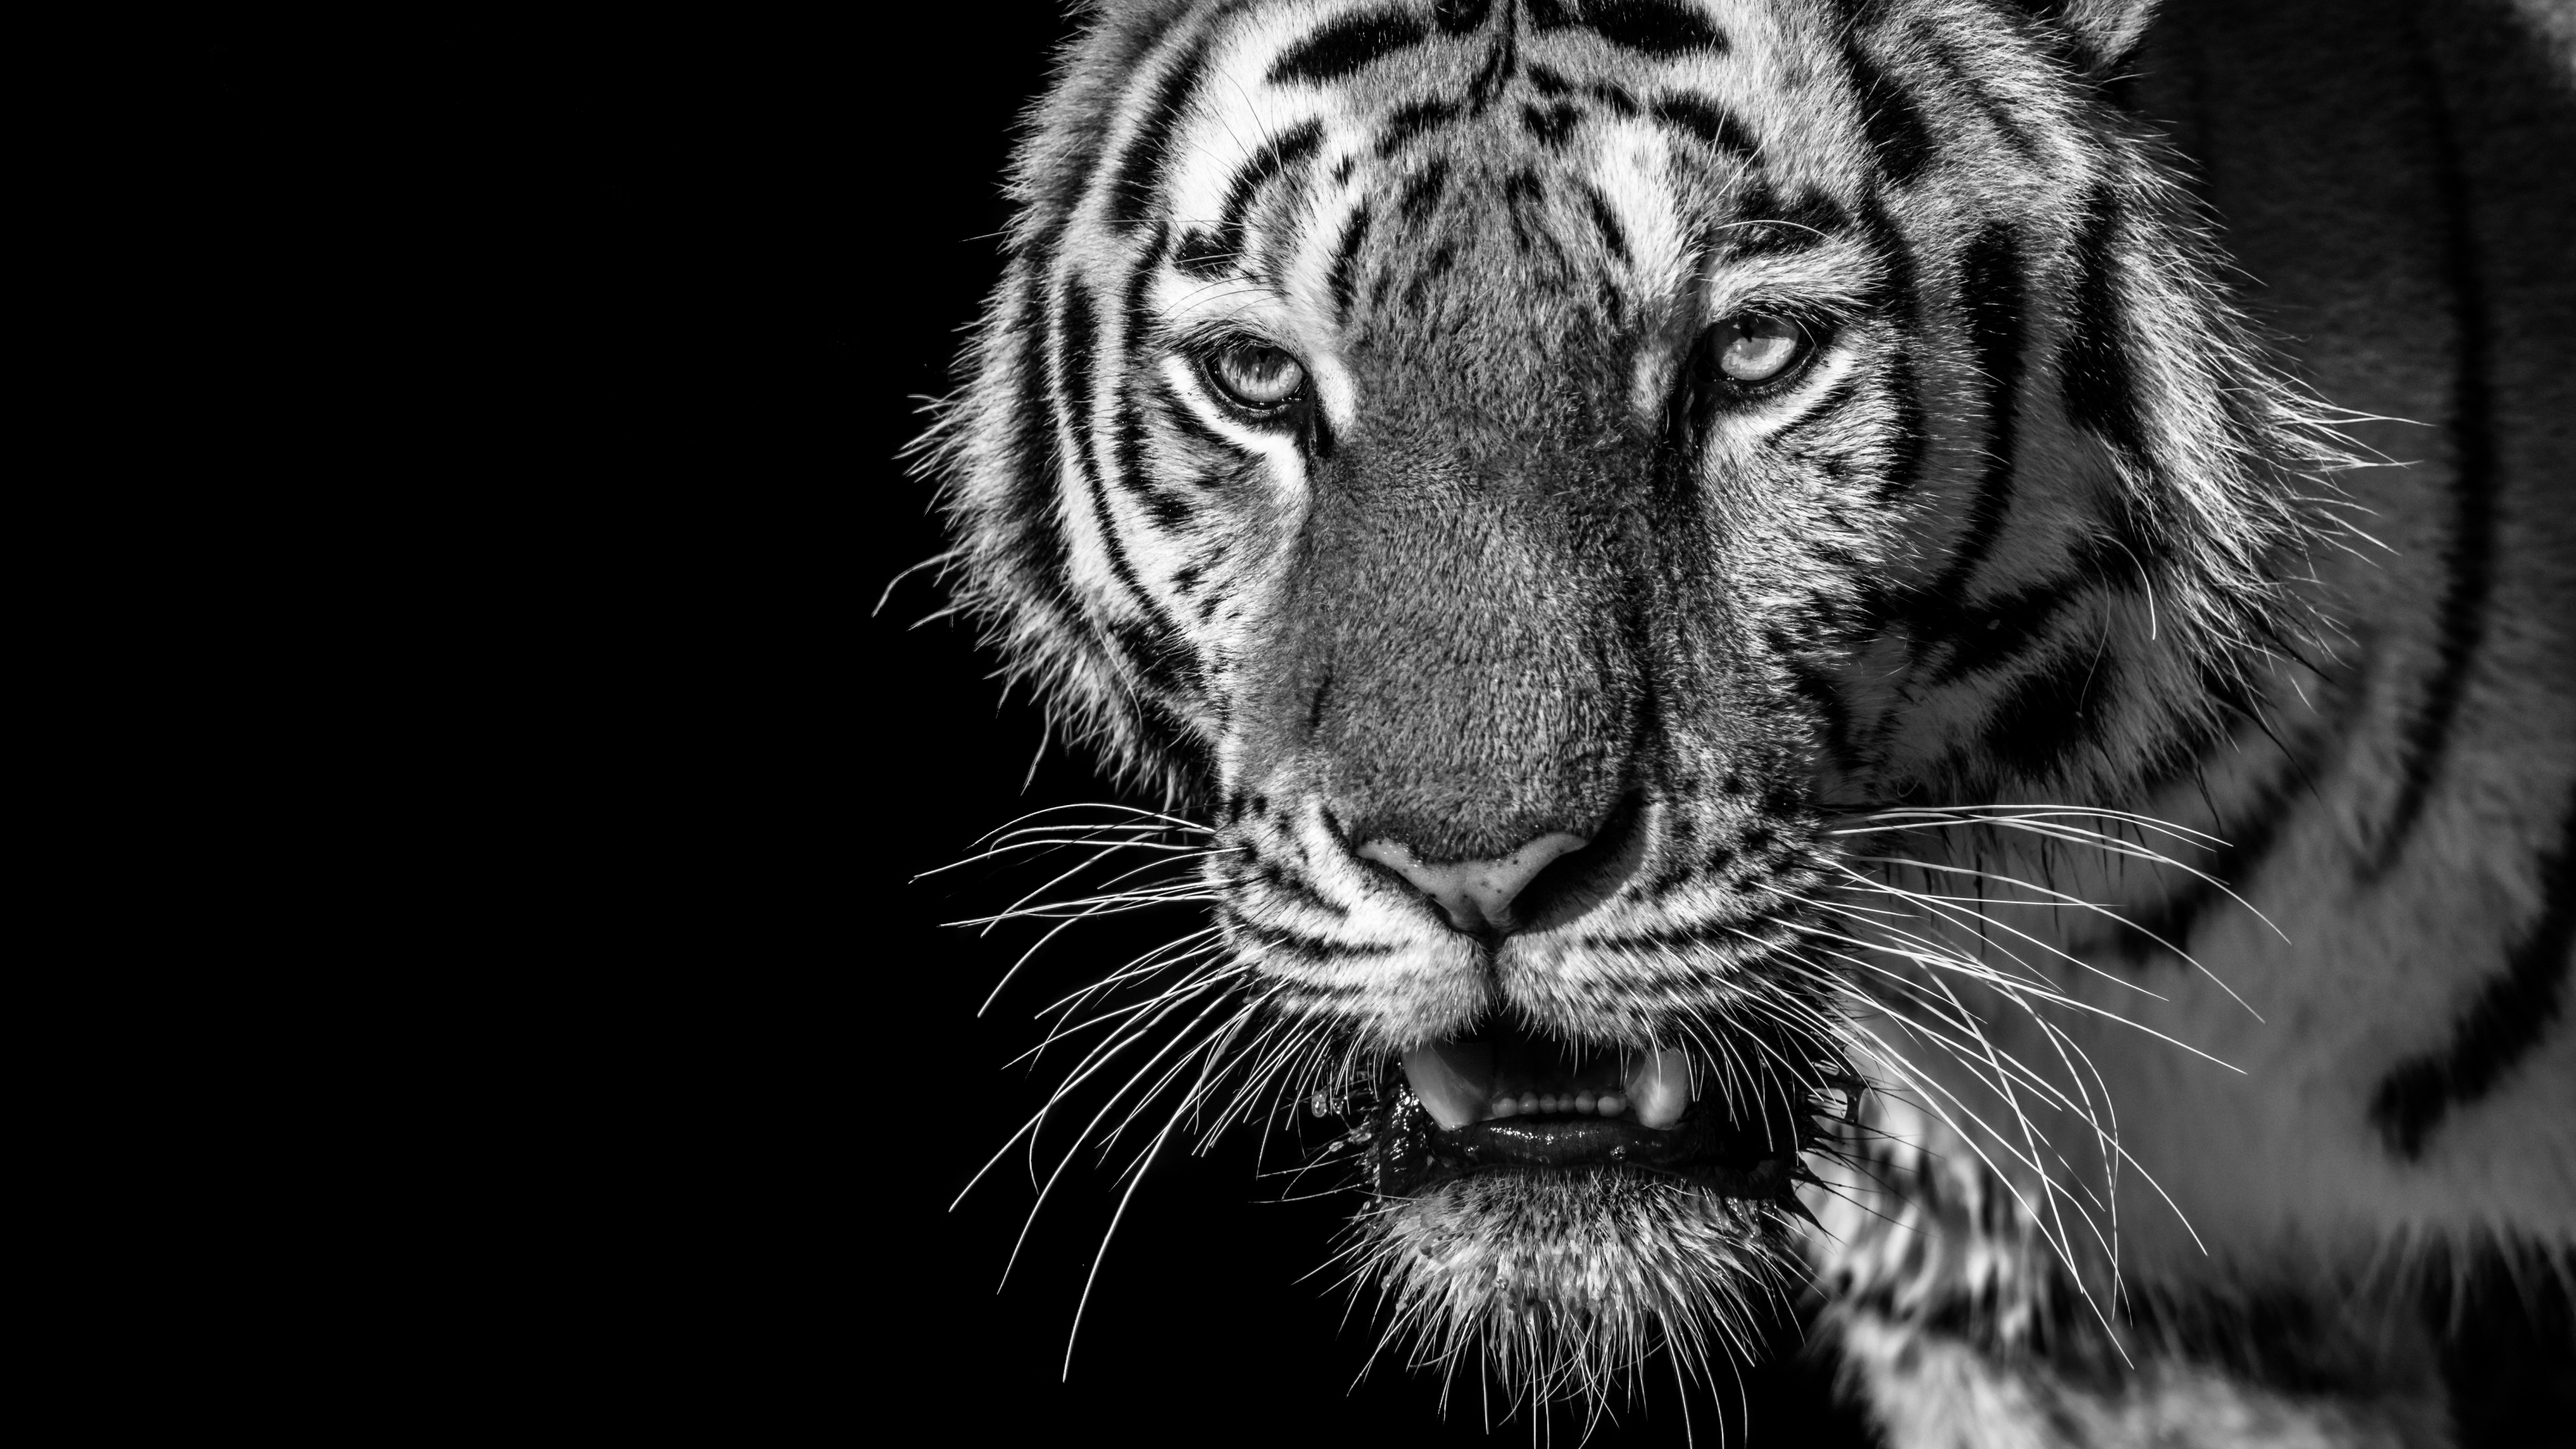 White and Black Tiger Illustration. Wallpaper in 3840x2160 Resolution